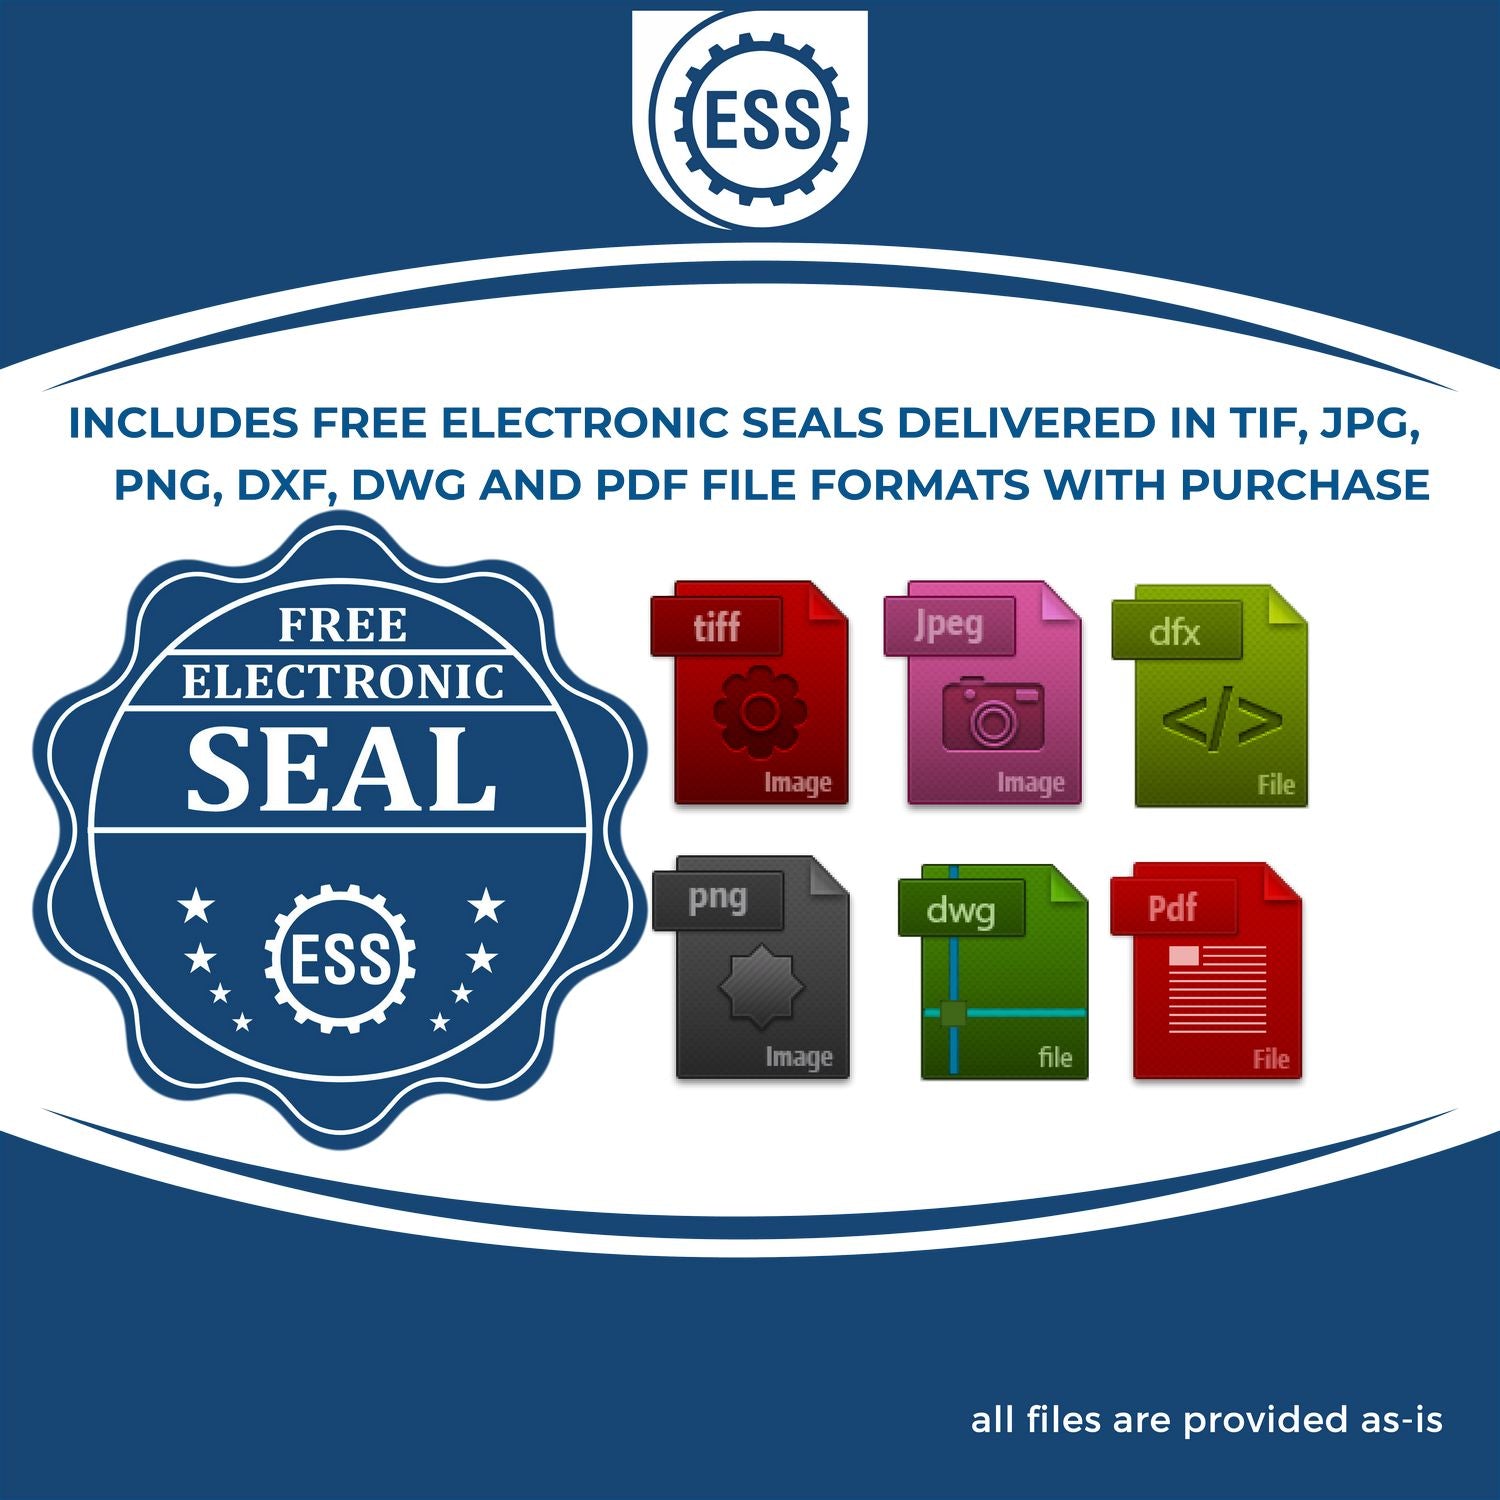 An infographic for the free electronic seal for the Extended Long Reach Tennessee Surveyor Embosser illustrating the different file type icons such as DXF, DWG, TIF, JPG and PNG.